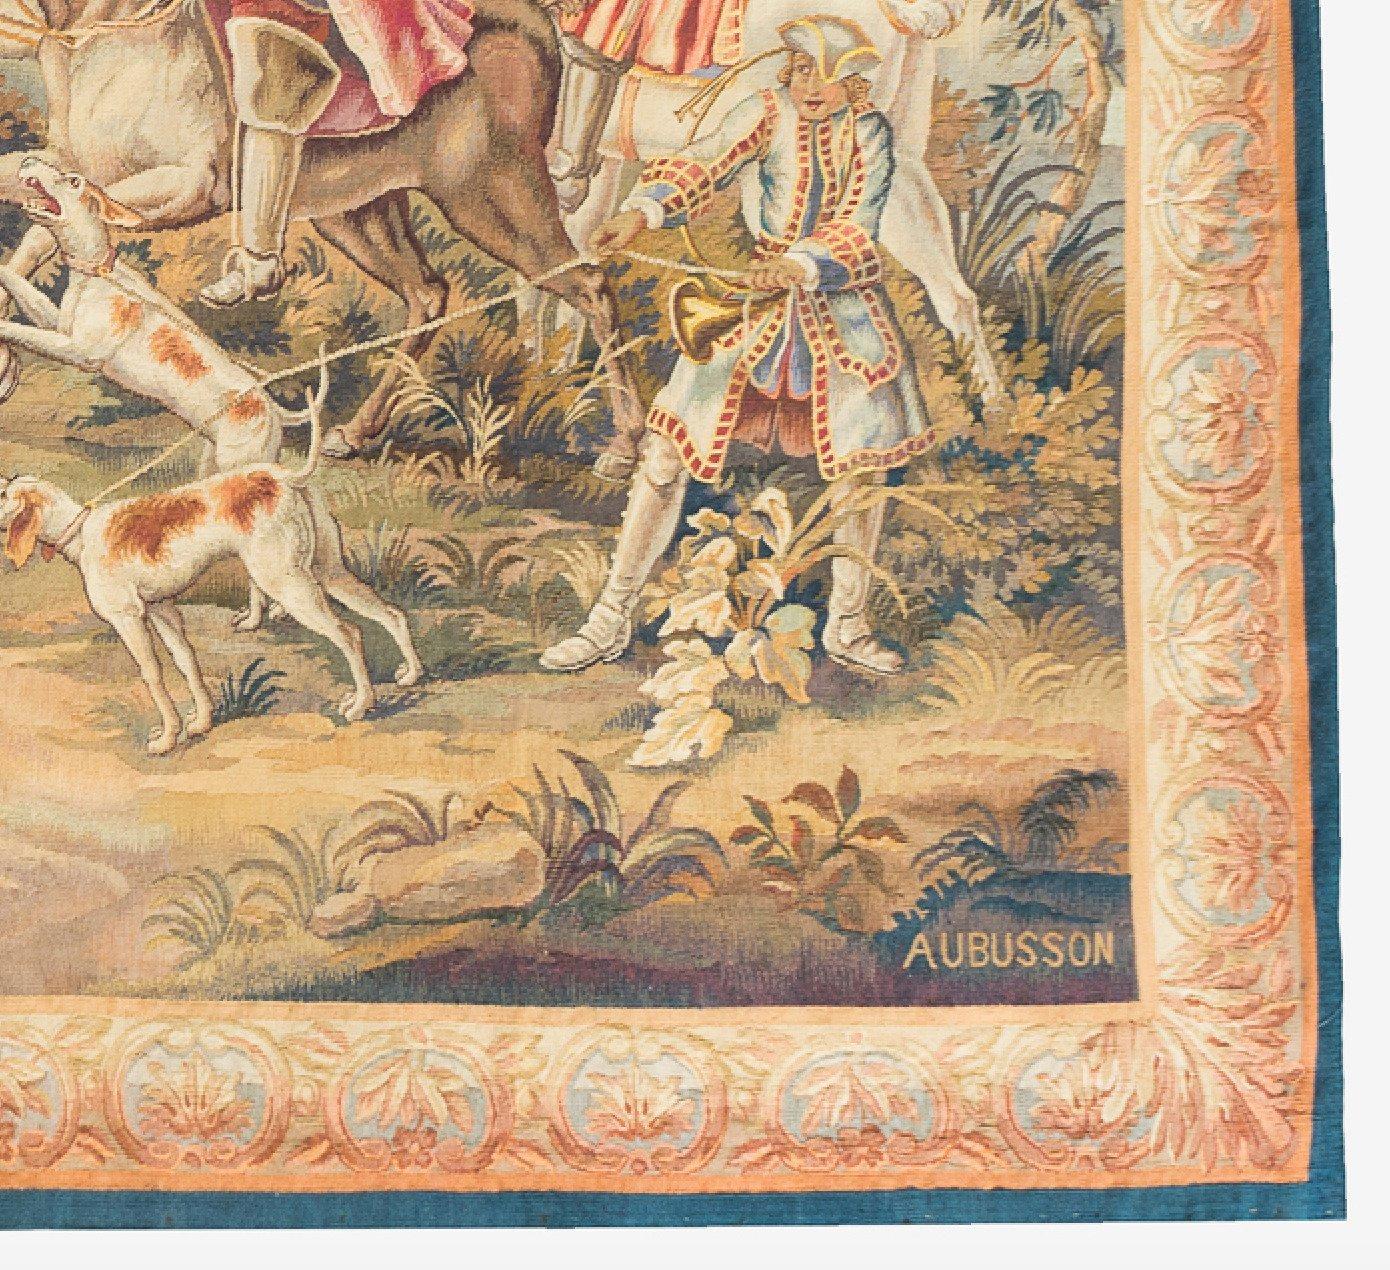 Antique 19th century Square French Aubusson Hunting Tapestry depicting an excellent hunting scene on the banks of a river complete with men on white horses and hunting dogs that have captured a deer in the river. The scene is surrounded by verdant